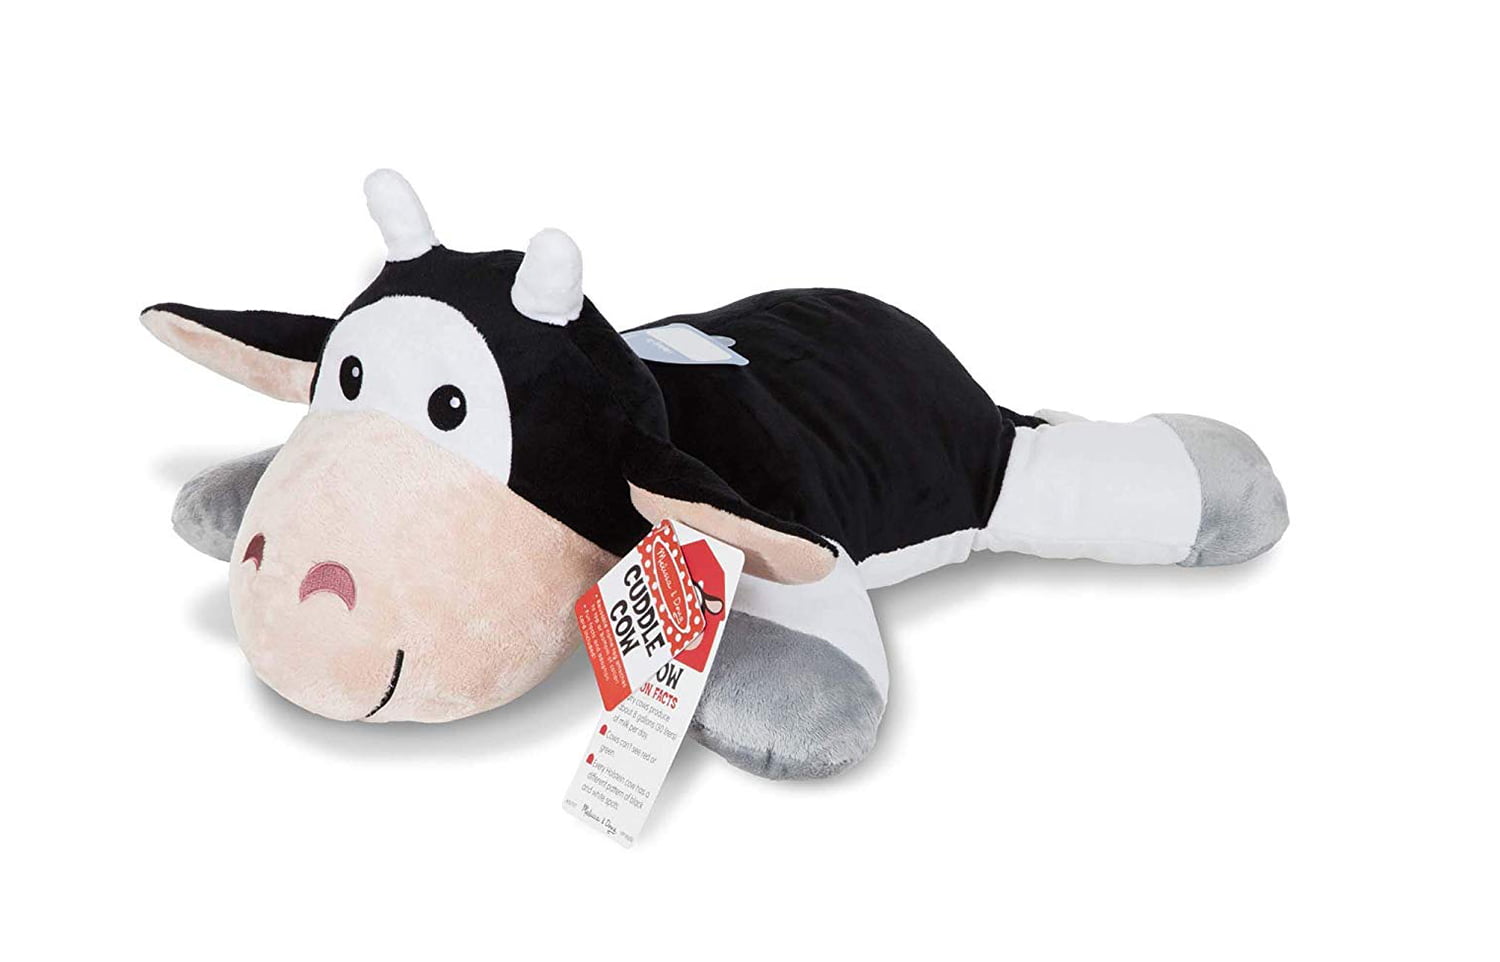 Cow Kids Pillow Plush Wool Furry Body Velvety Hooves Soft Cozy Comfortable New